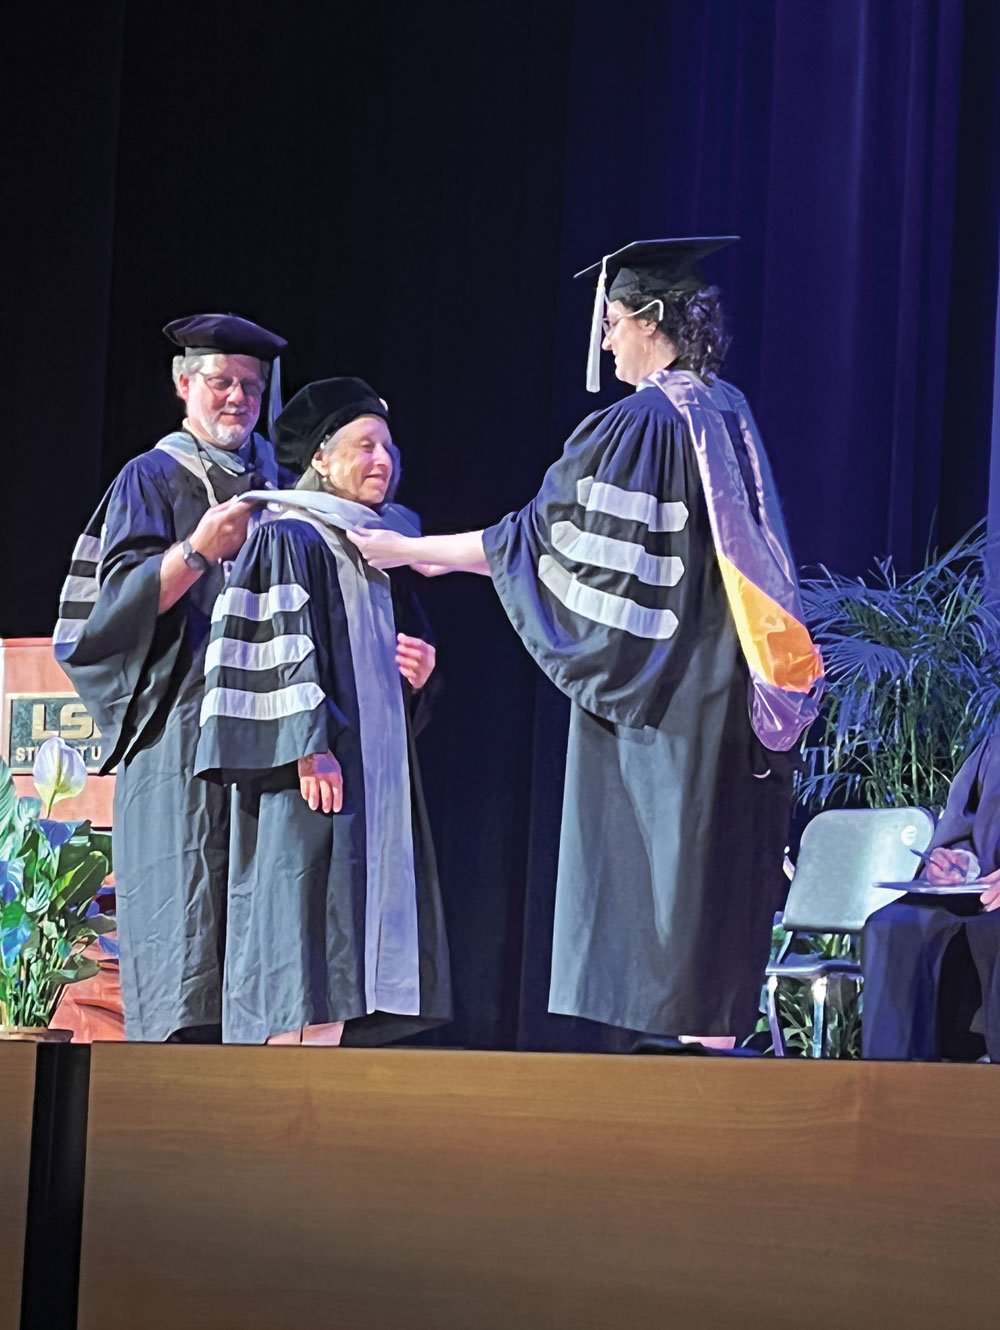 Dr. Justine Bruner being hooded by Drs. Joseph Taboada and Shannon Dehghanpir